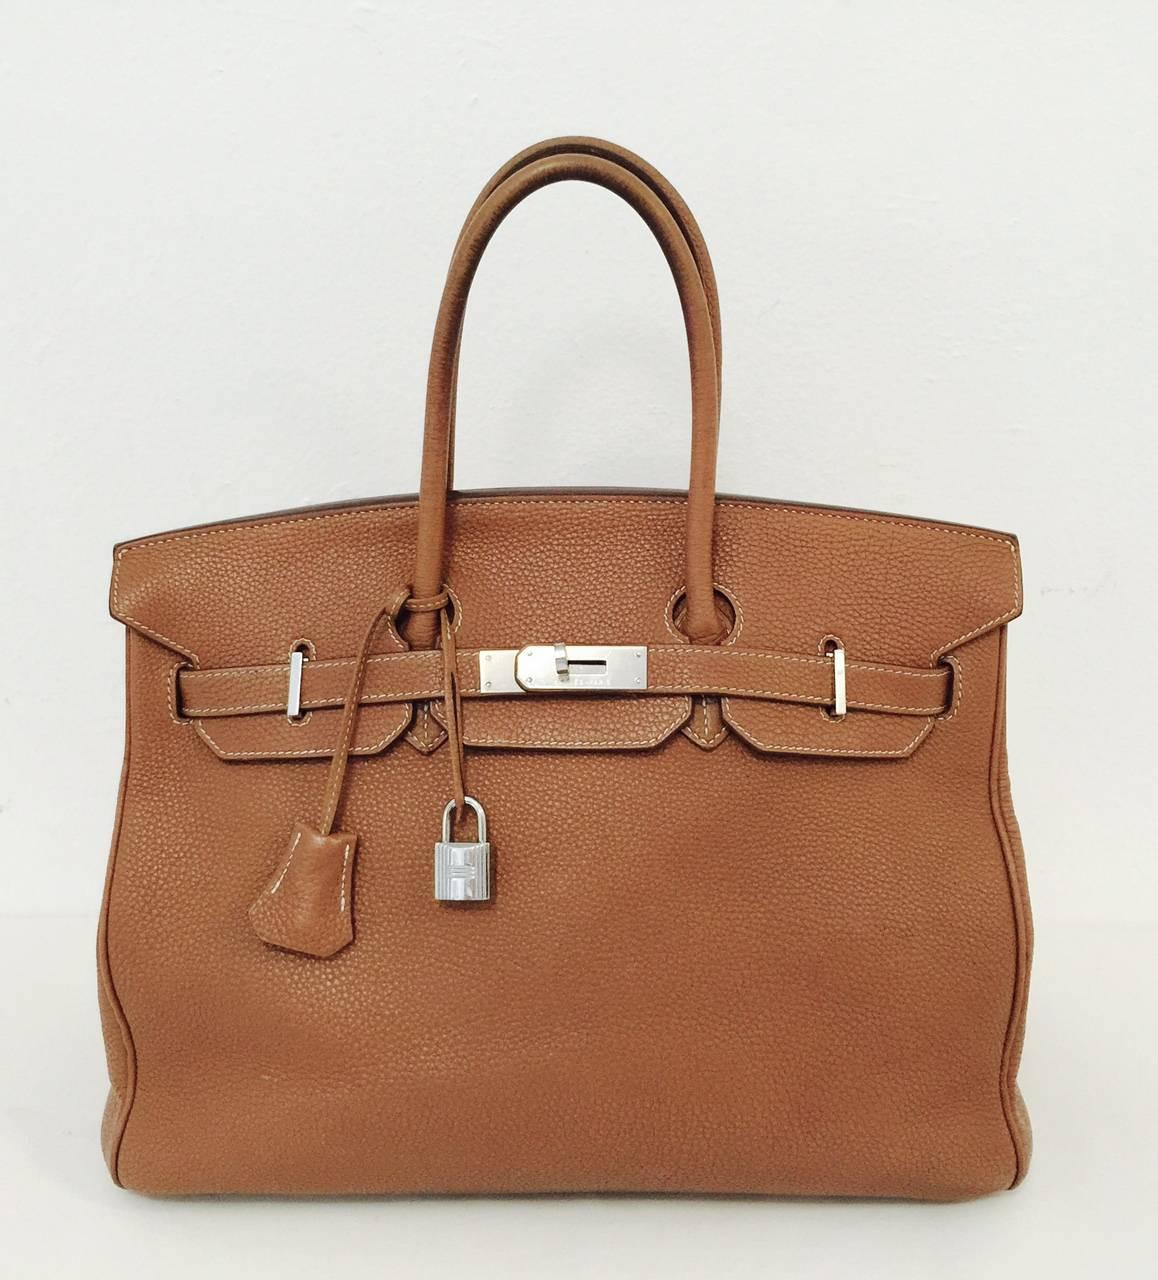 This classic, luxurious Gold Hermès Birkin 35 cm handbag is finely crafted of Clemence leather and has gold hardware. It features the intricate Birkin Croix clasp, lock and key security and Hermès' signature cousu sellier stitching. The bottom is